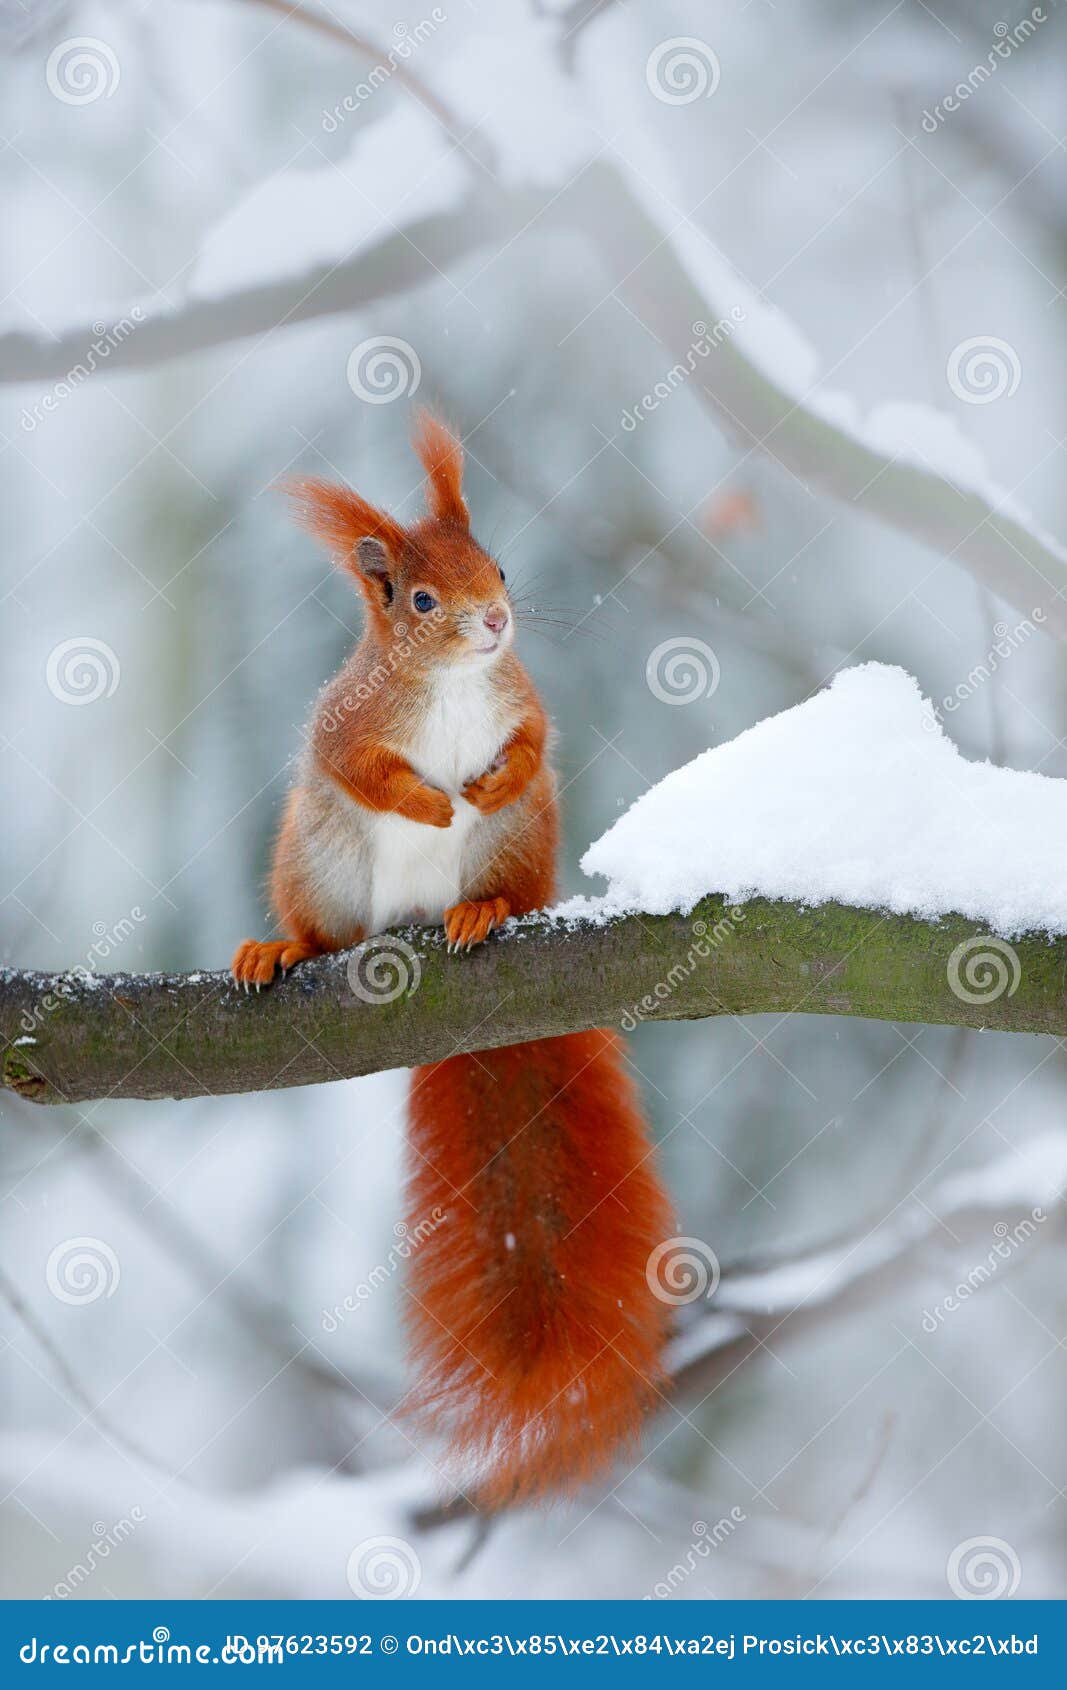 cute orange red squirrel eats a nut in winter scene with snow, czech republic. ccold winter with snow. winter forest with beautifu